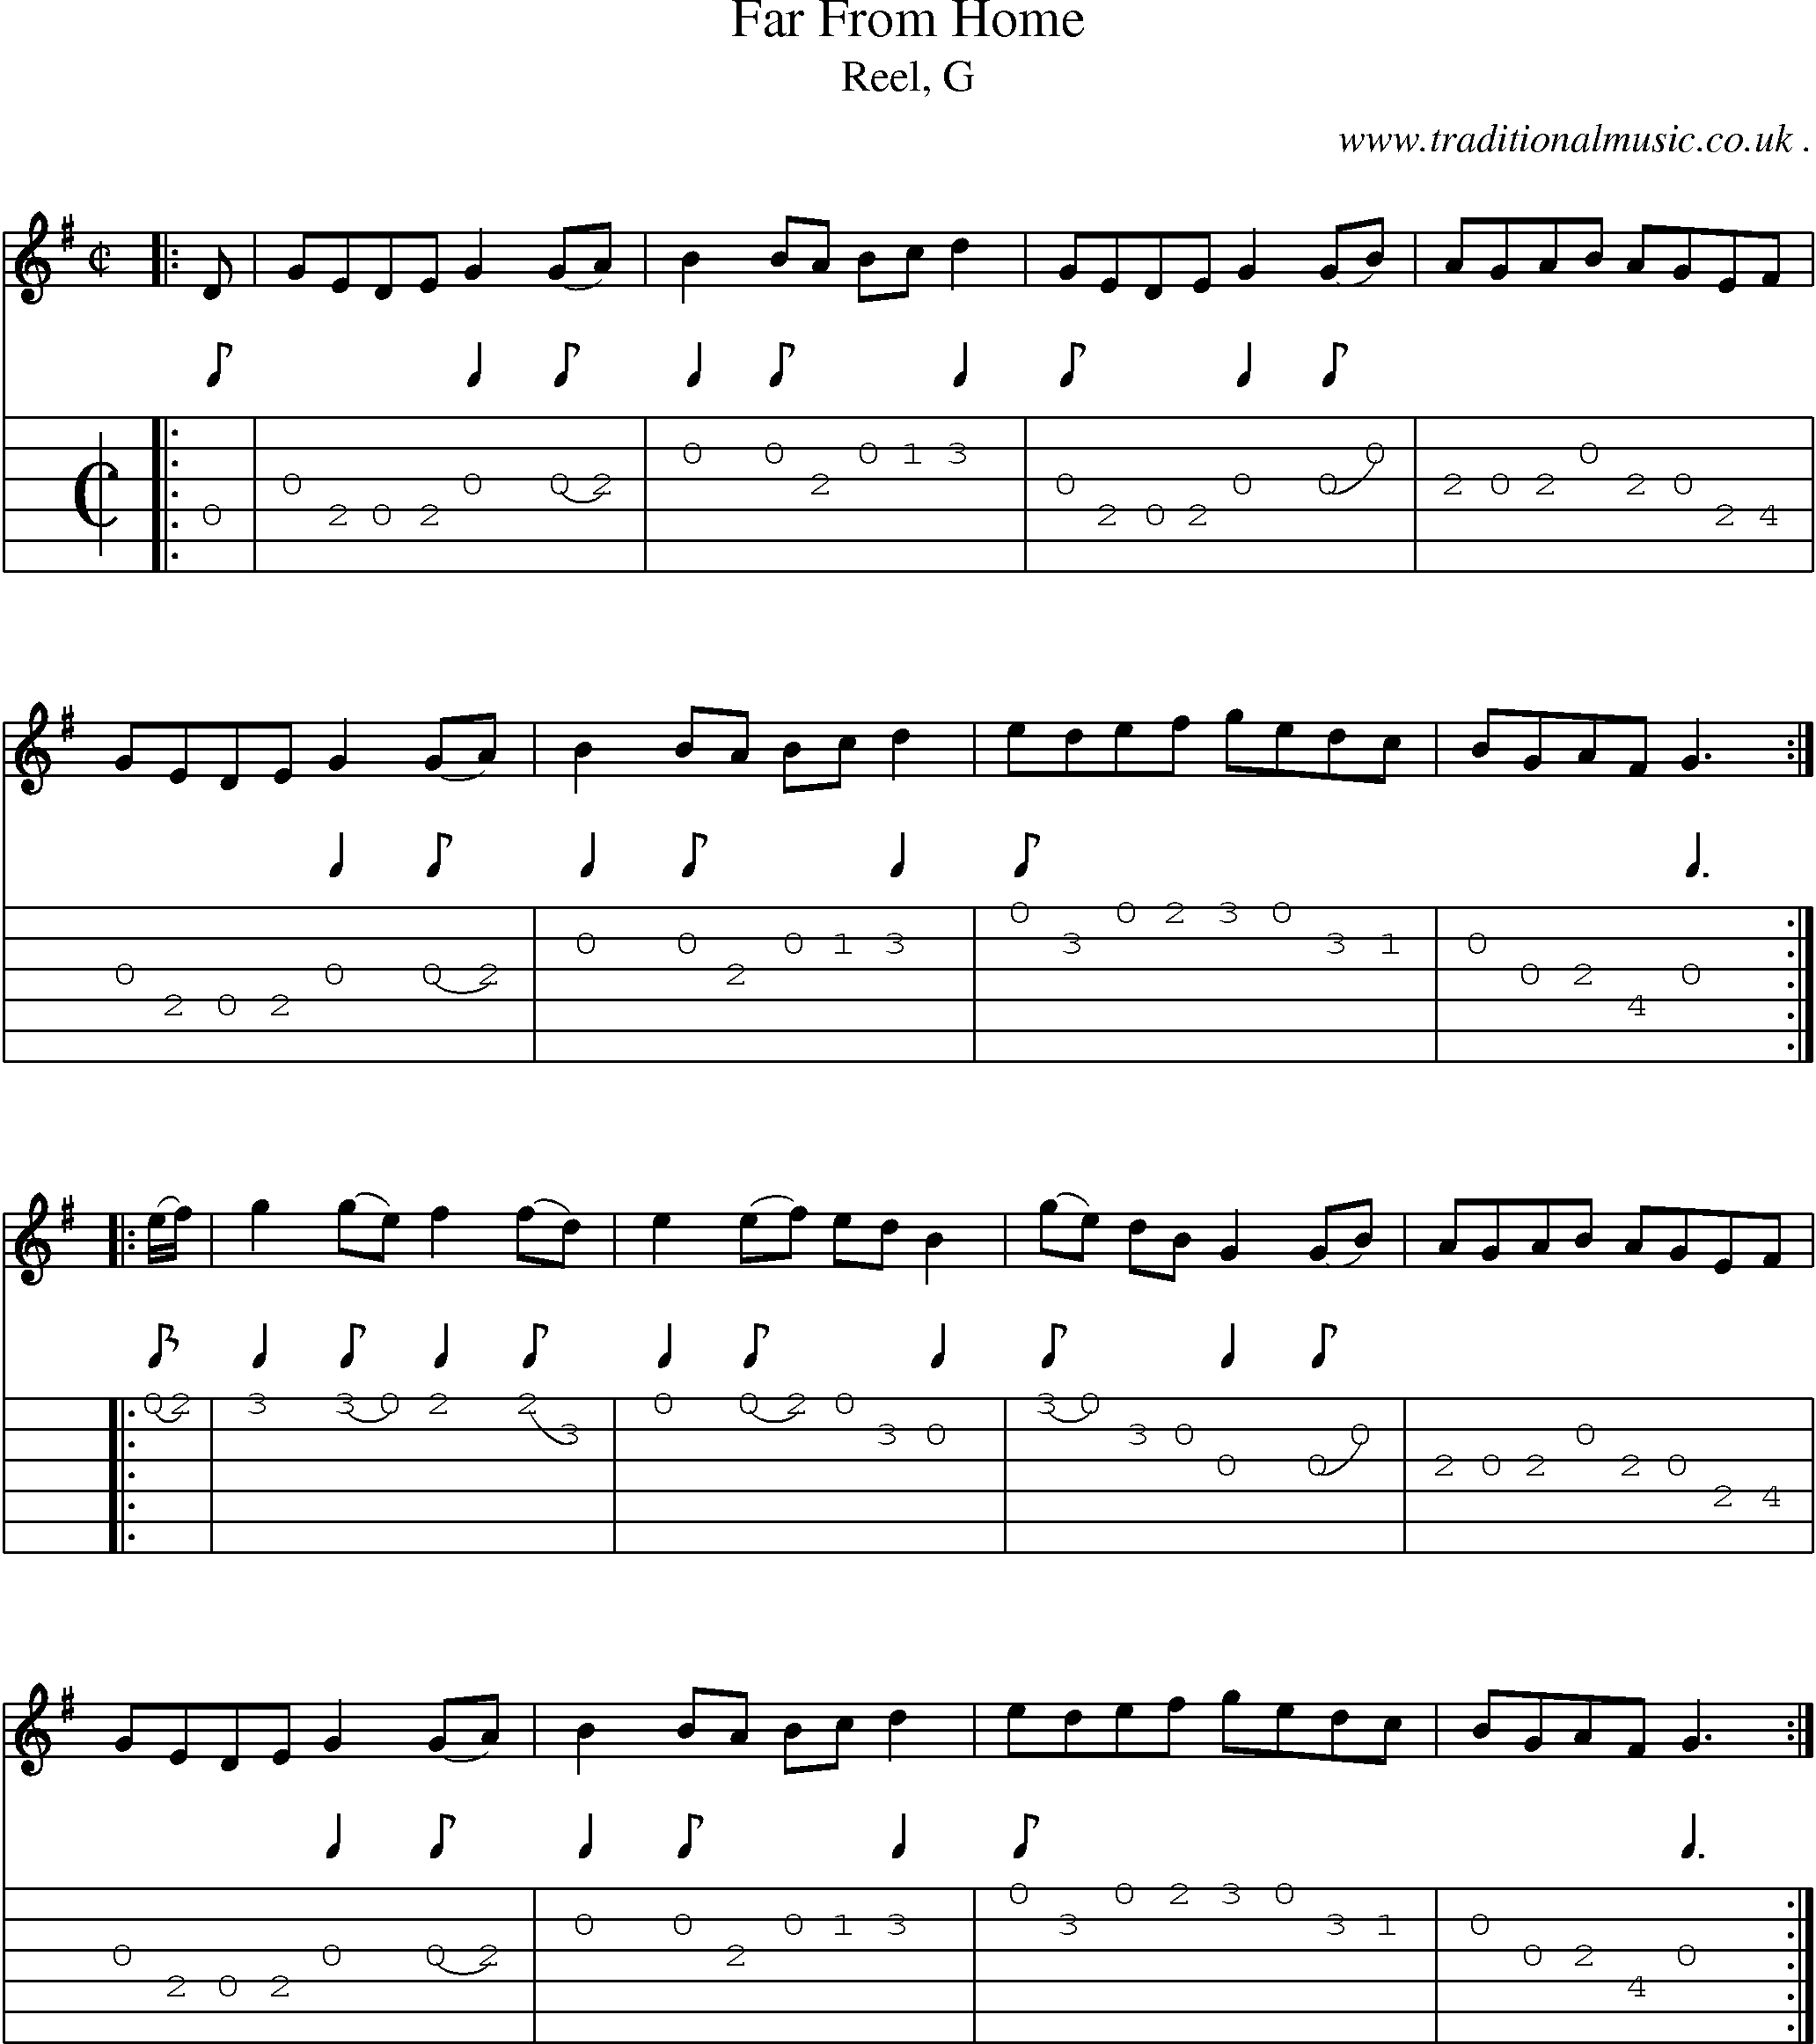 Sheet-music  score, Chords and Guitar Tabs for Far From Home